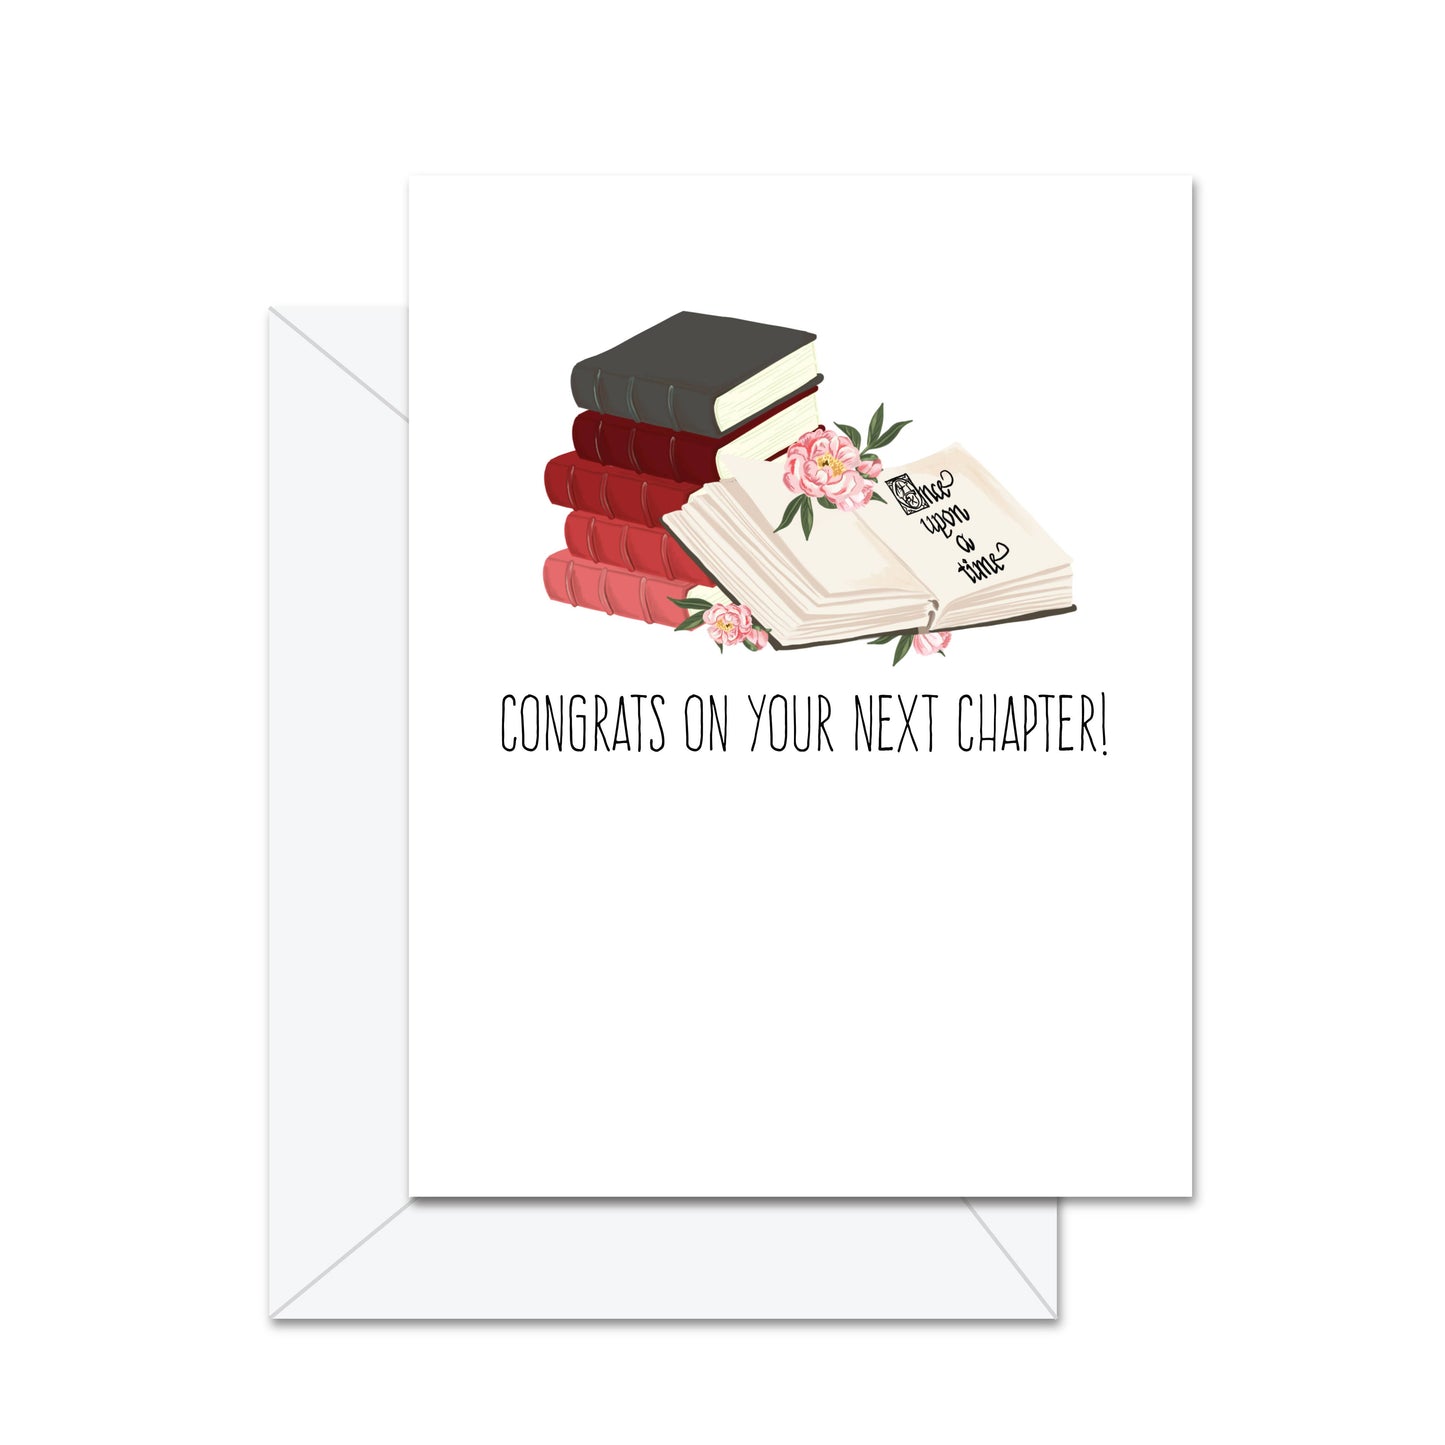 Jaybee Design | Greeting Card - Congrats On Your Next Chapter!